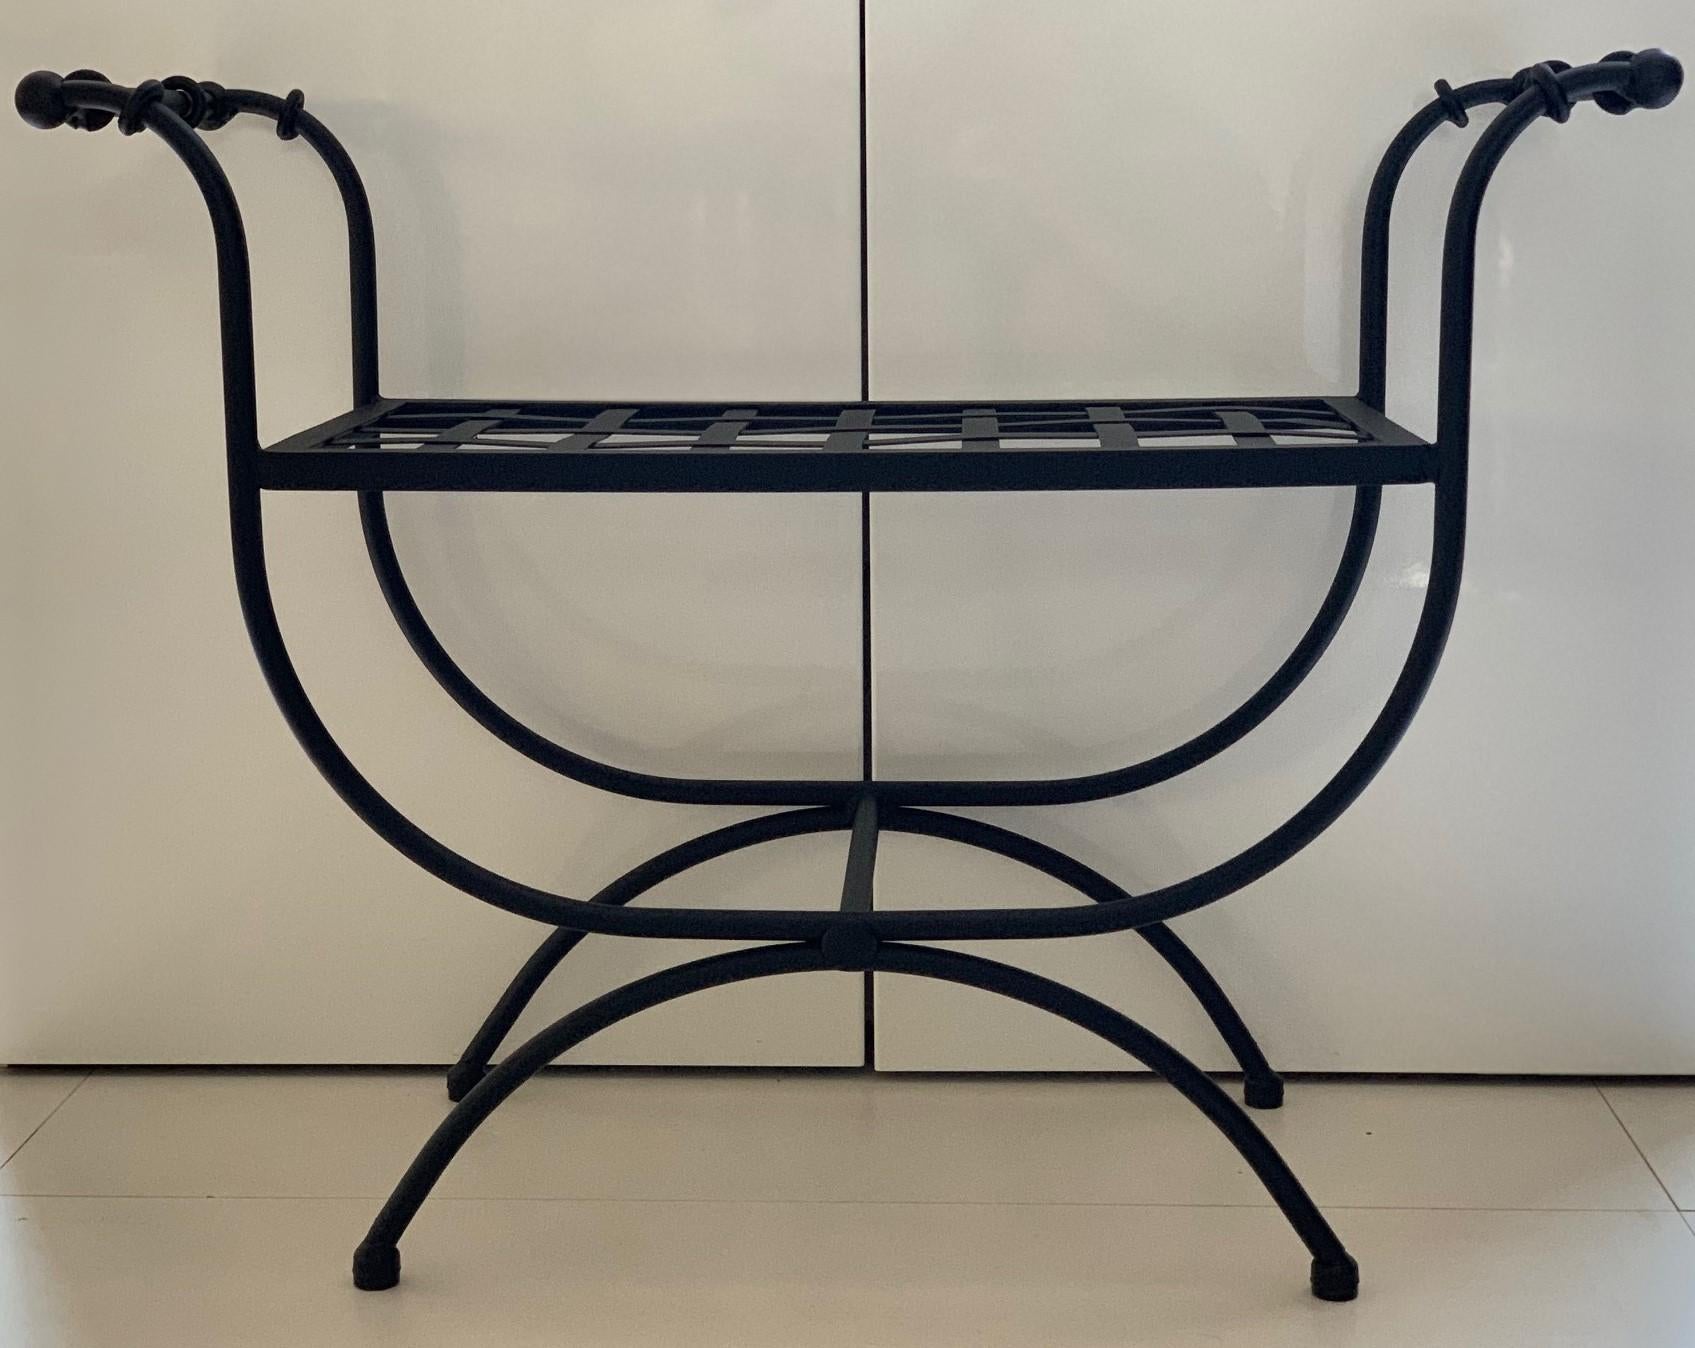 Neoclassical New Black Wrought Iron Curule Bench with Cushion, Savonarola, Throne For Sale